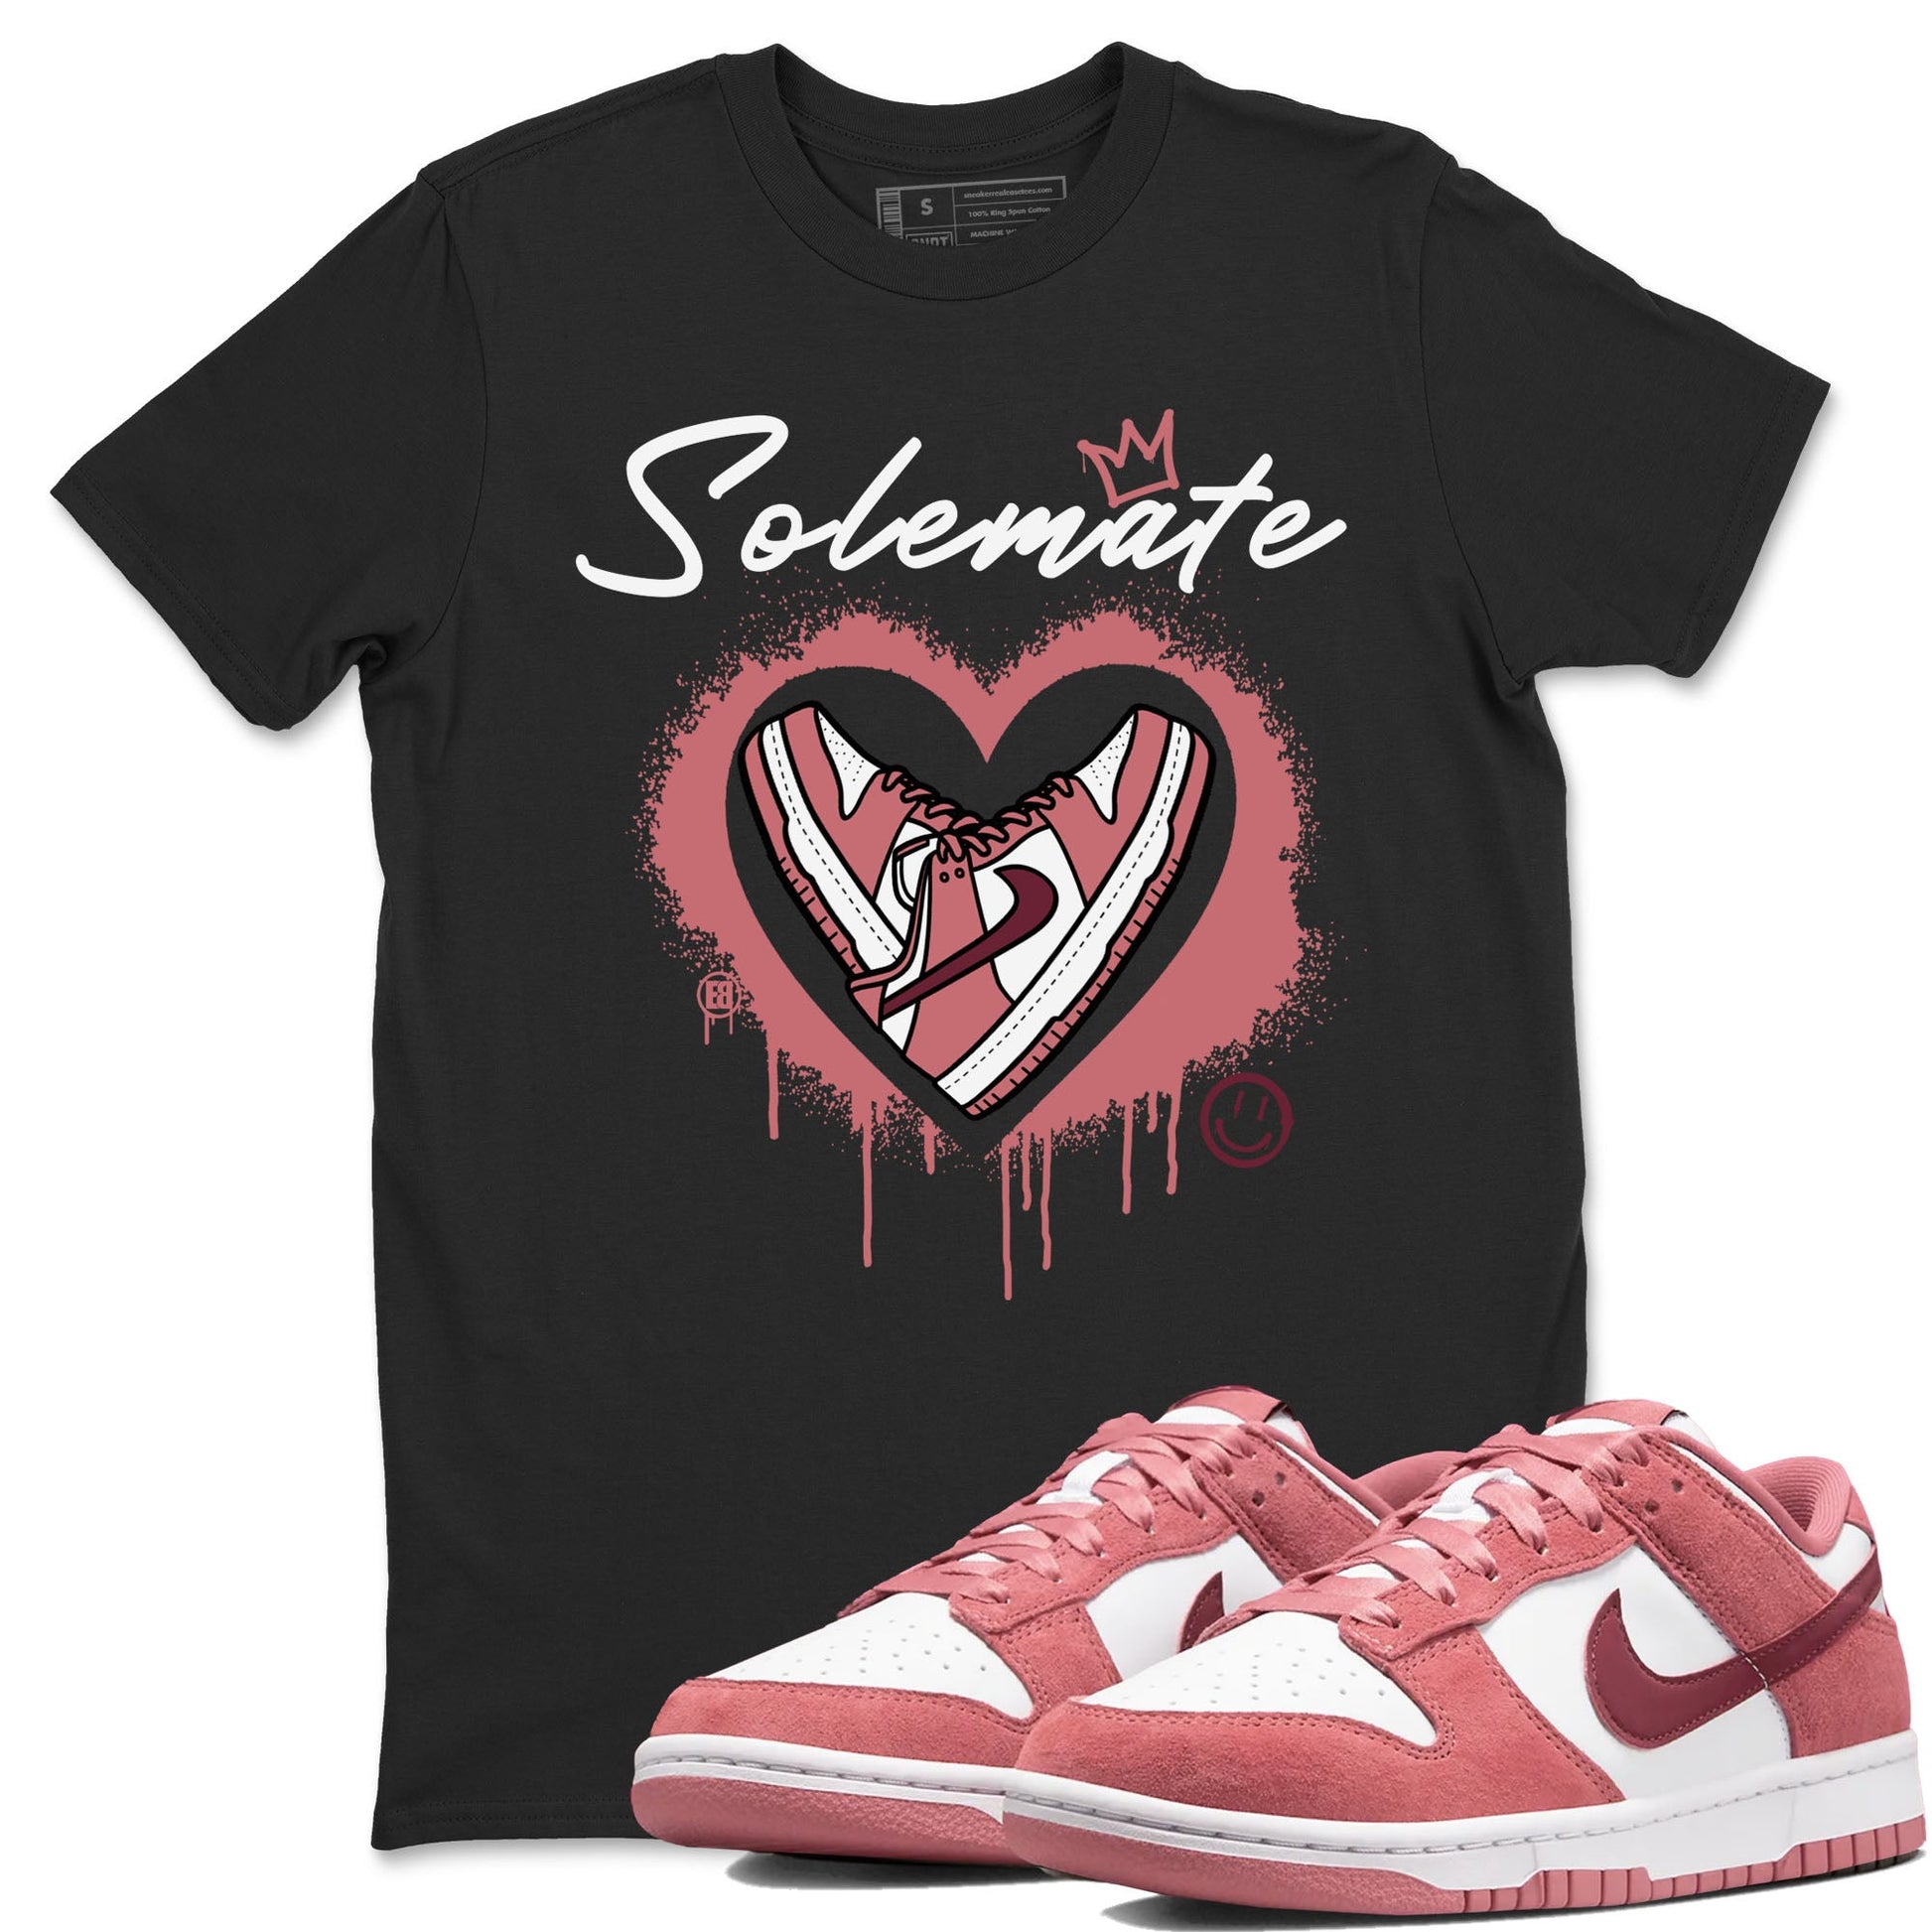 Solemate sneaker match tees to Dunk Valentine's Day street fashion brand for shirts to match Jordans SNRT Sneaker Tees Dunk Valentine's Day unisex t-shirt Black 1 unisex shirt